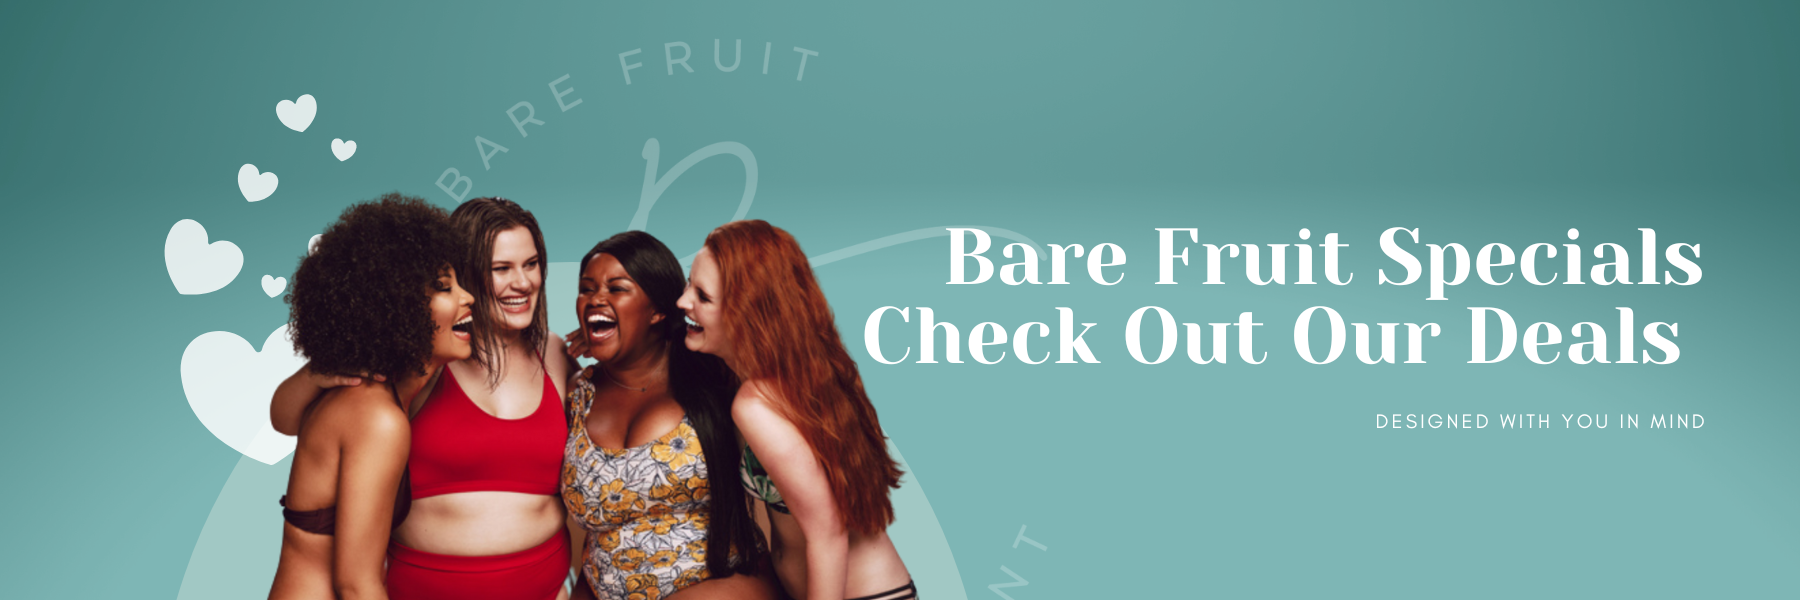 Bare Fruit Specials! Check out our deals! Designed with you in mind from bare fruit sugaring